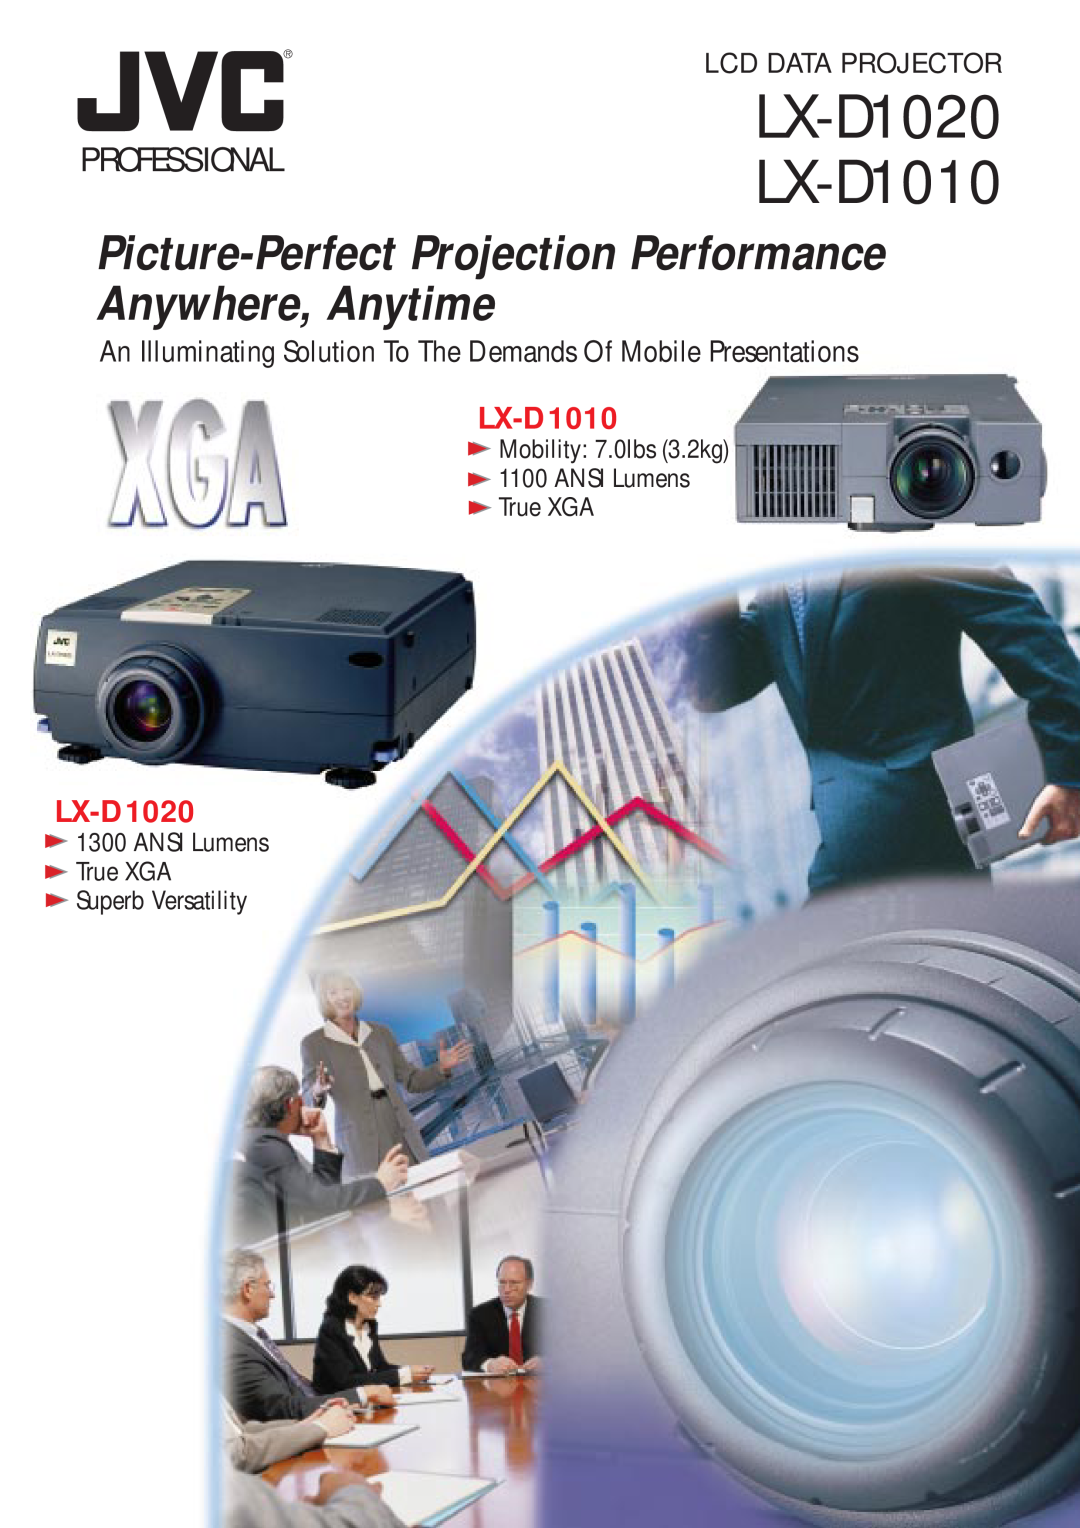 JVC manual LX-D1020 LX-D1010, Picture-Perfect Projection Performance Anywhere, Anytime, Professional 